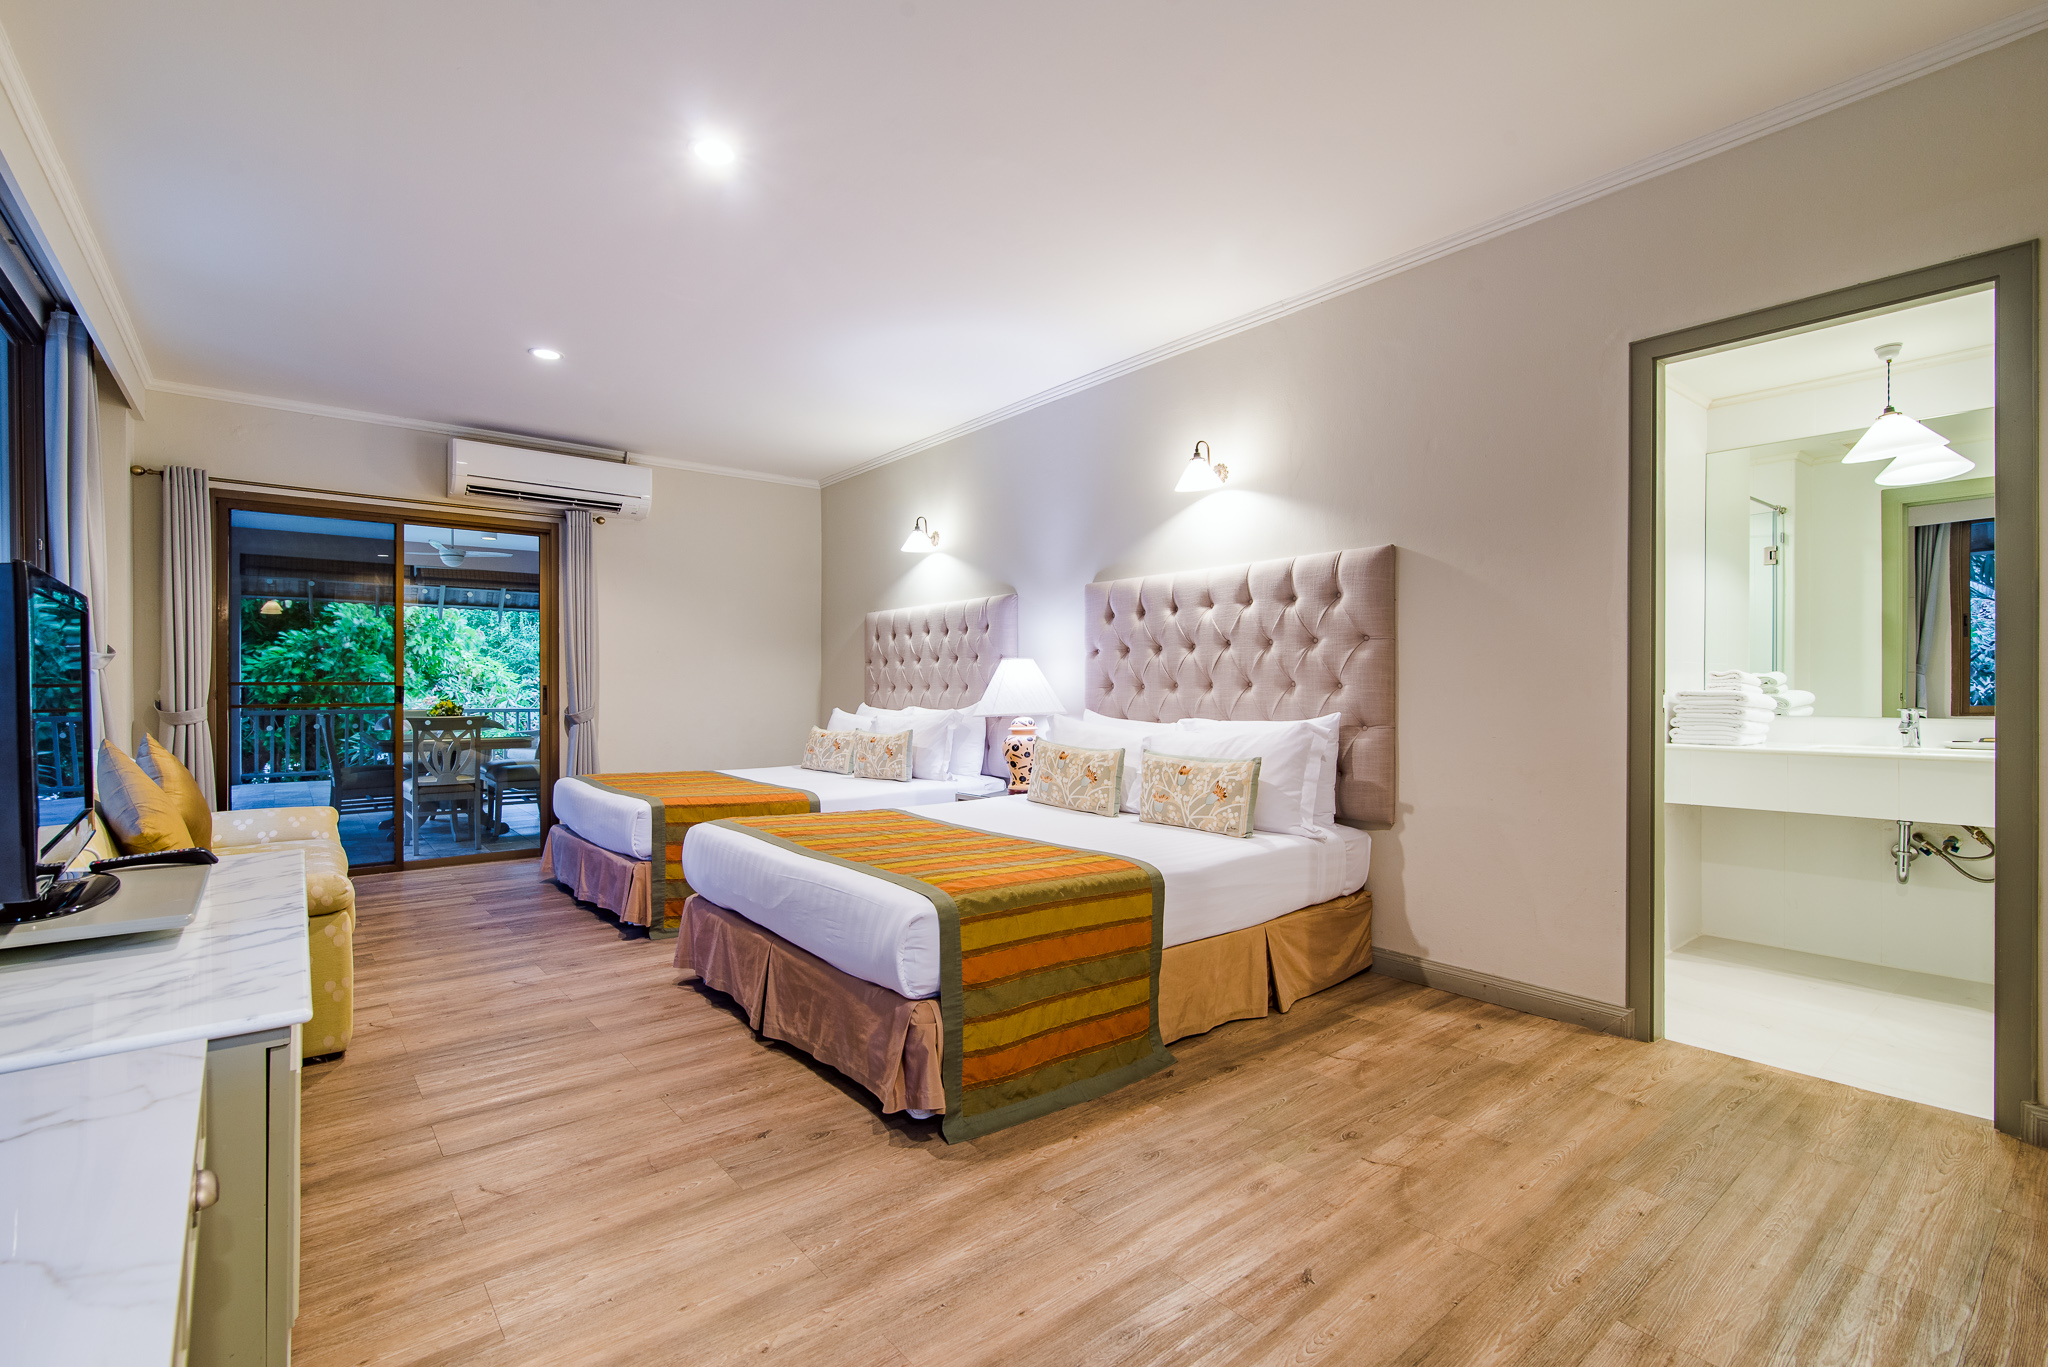 Master bedroom with two queen size beds and the second bedroom with a queen size bed and en suite bathrooms in each. Outdoor dining area and fully equipped kitchen including microwave oven. Terrace furnished with deck furniture and plants facing the sea.